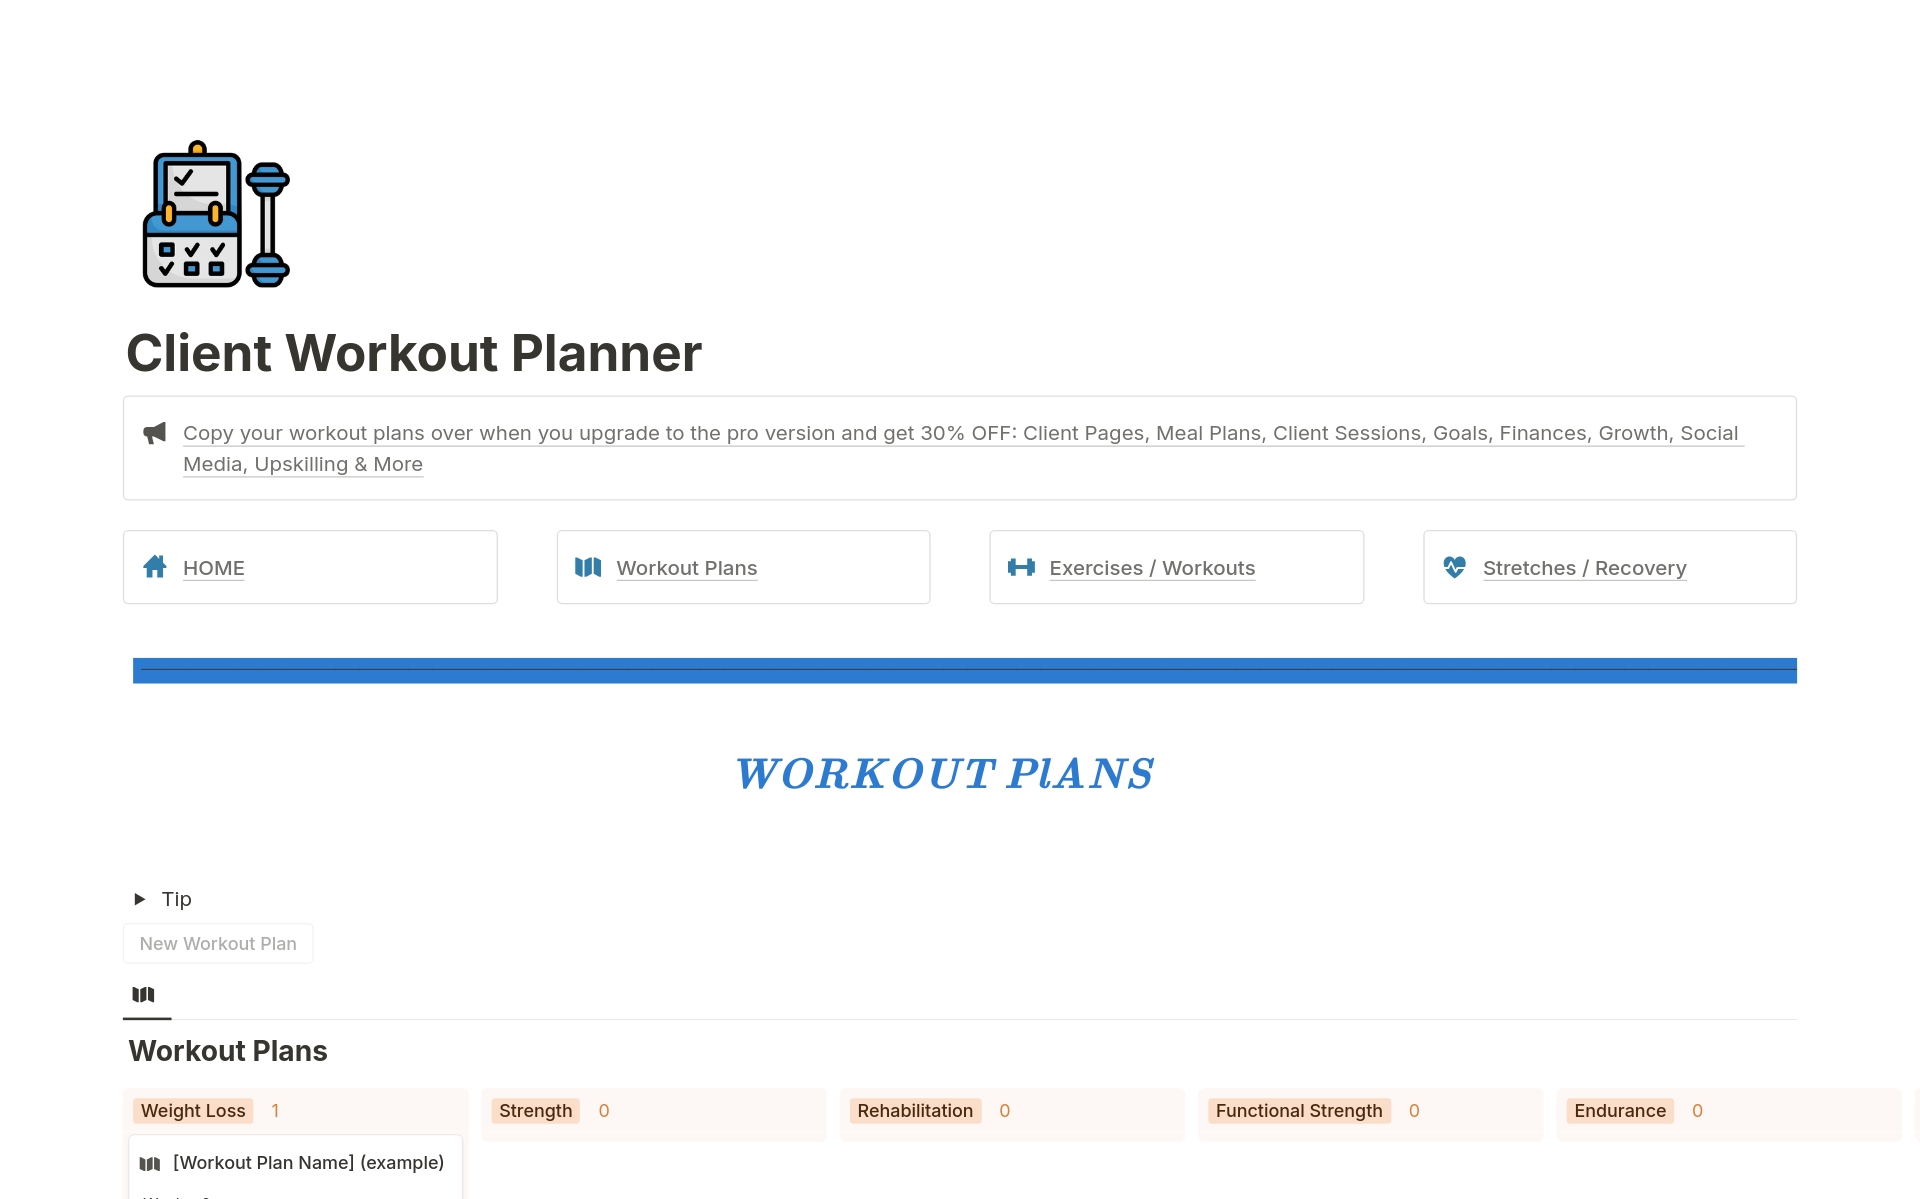 Client Workout Planner is a template for personal trainers or coaches who want to create workout plans aimed at achieving various goals (weight loss, muscle gain etc) that can be easily assigned to clients. 